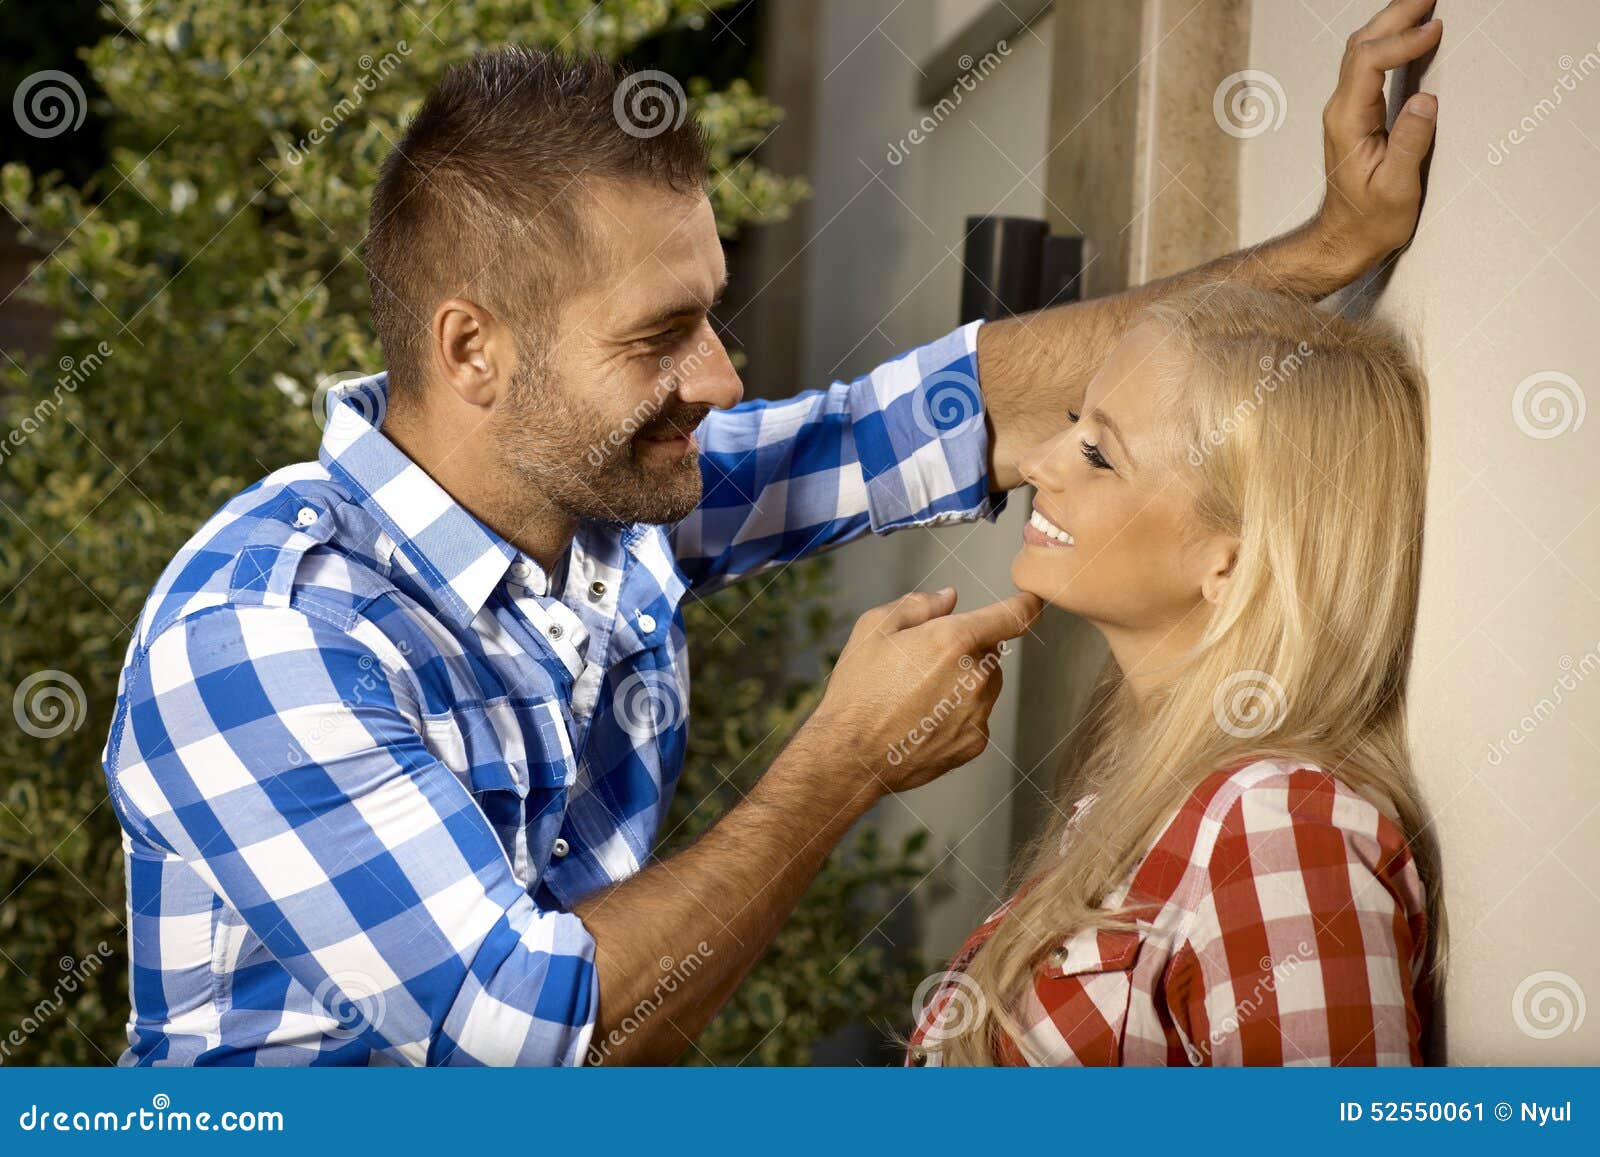 handsome man flirting with young woman outdoors